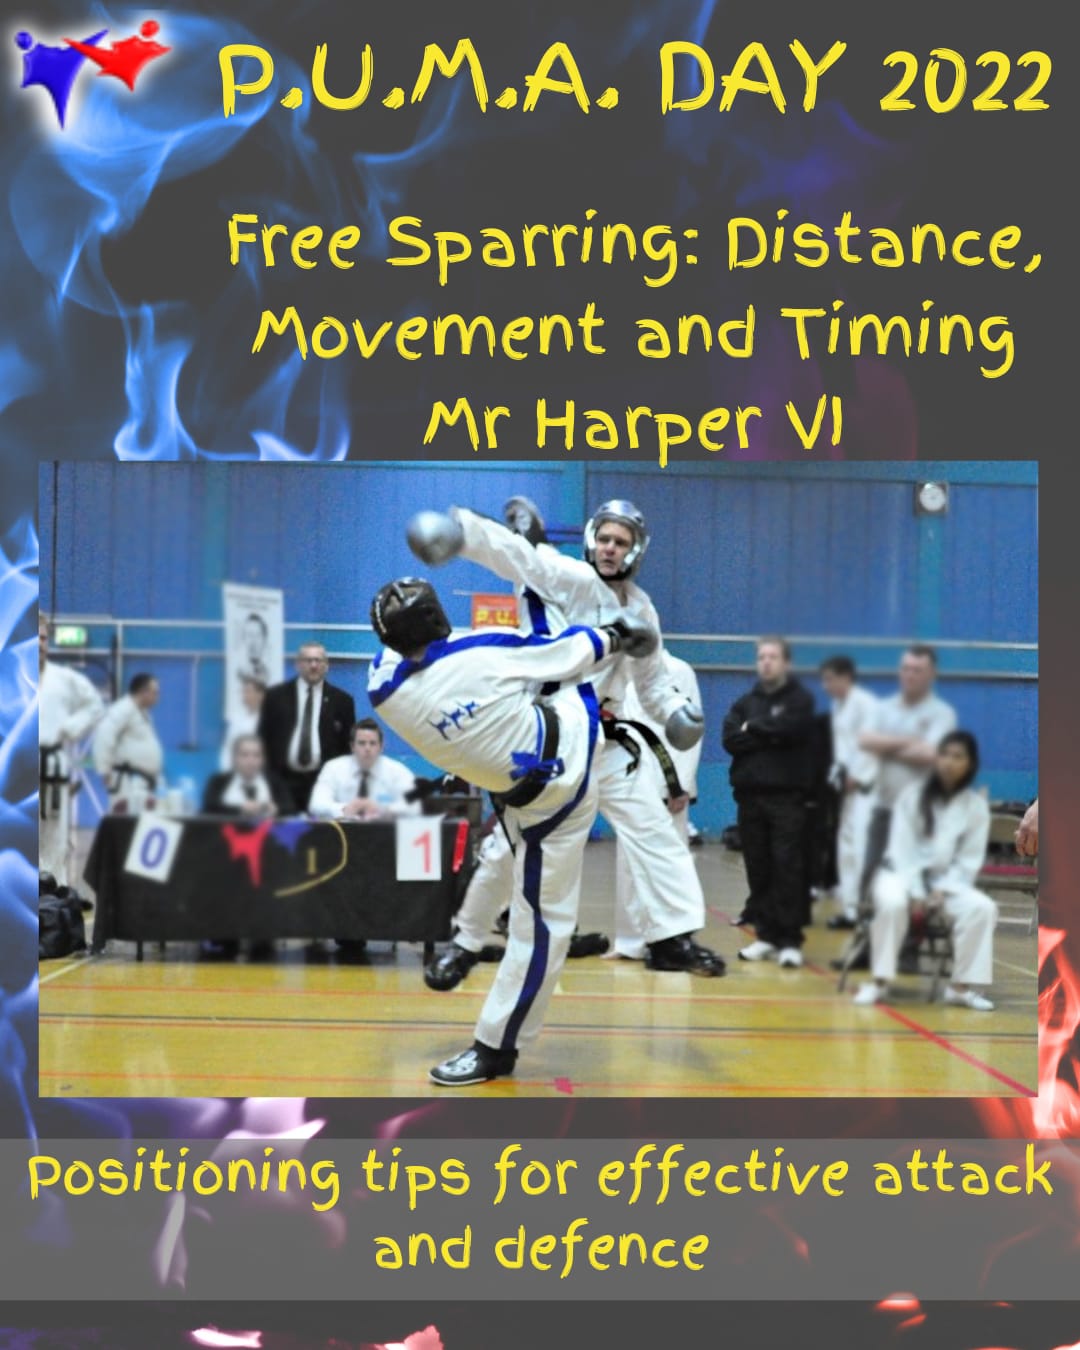 PUMA Day Free sparring: distance, movement, and timing